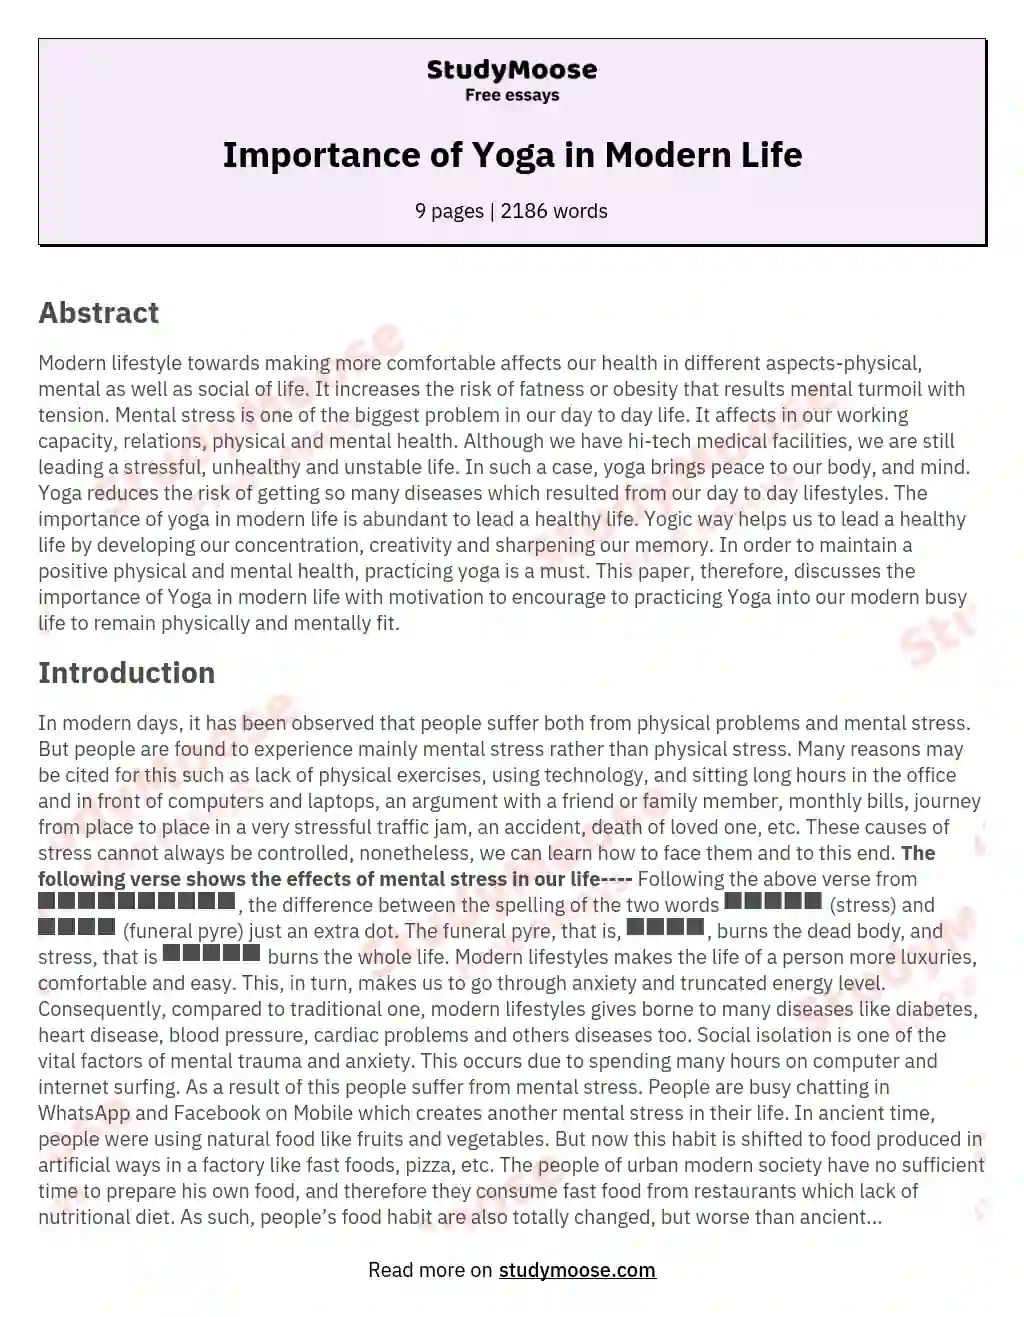 Importance of Yoga in Modern Life essay